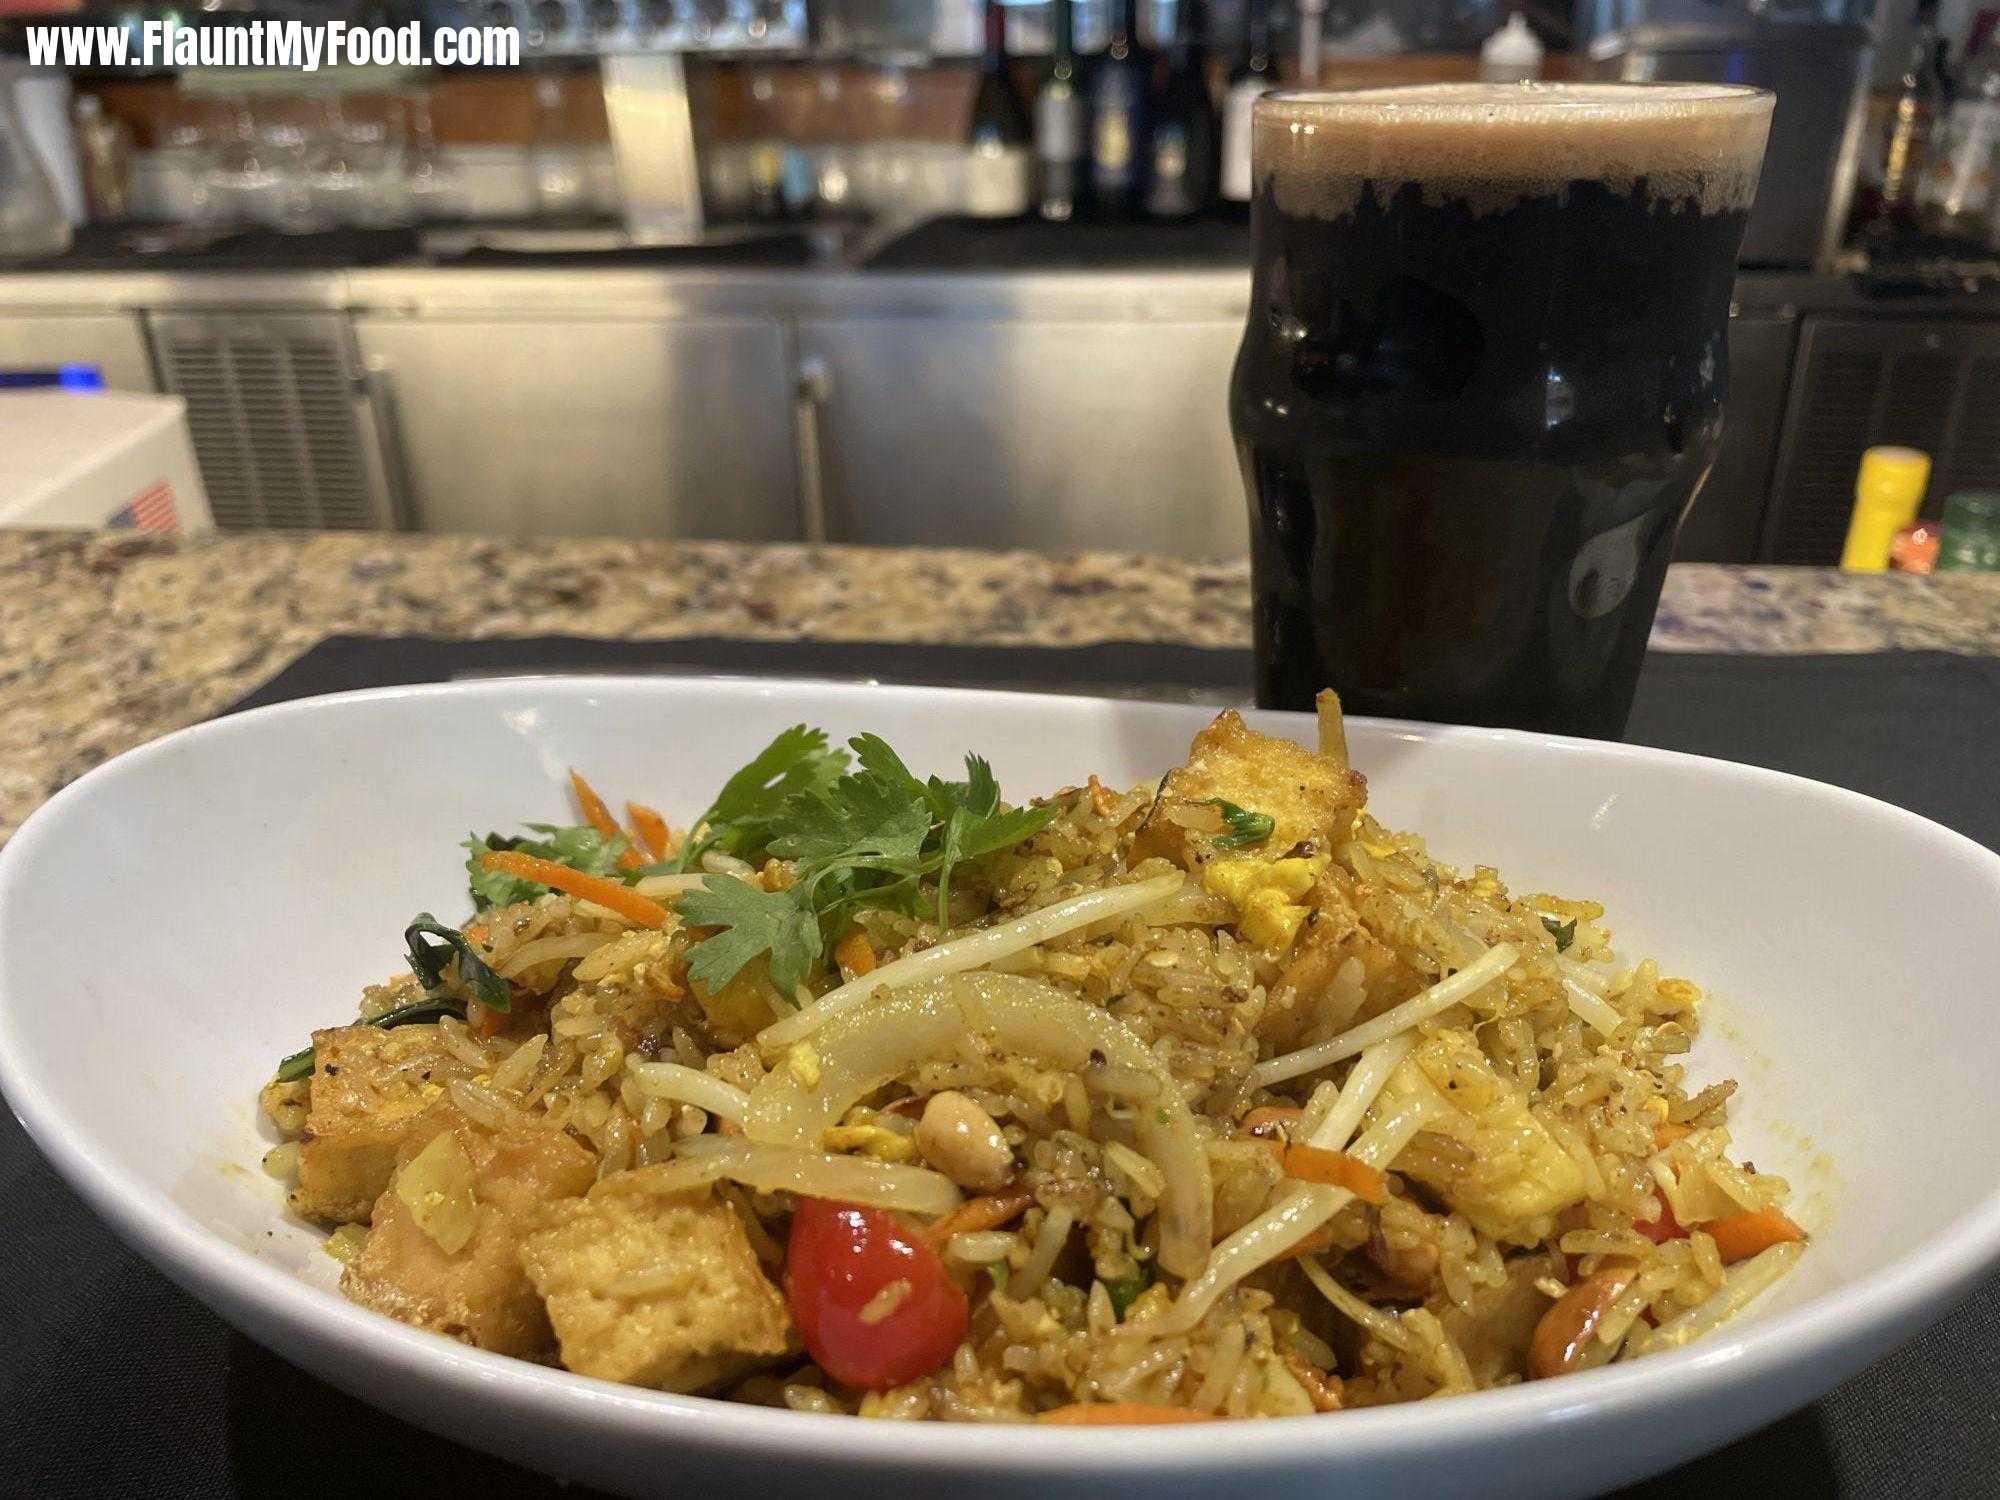 Malai Kitchen Fried Rice and 3C Porter Beer